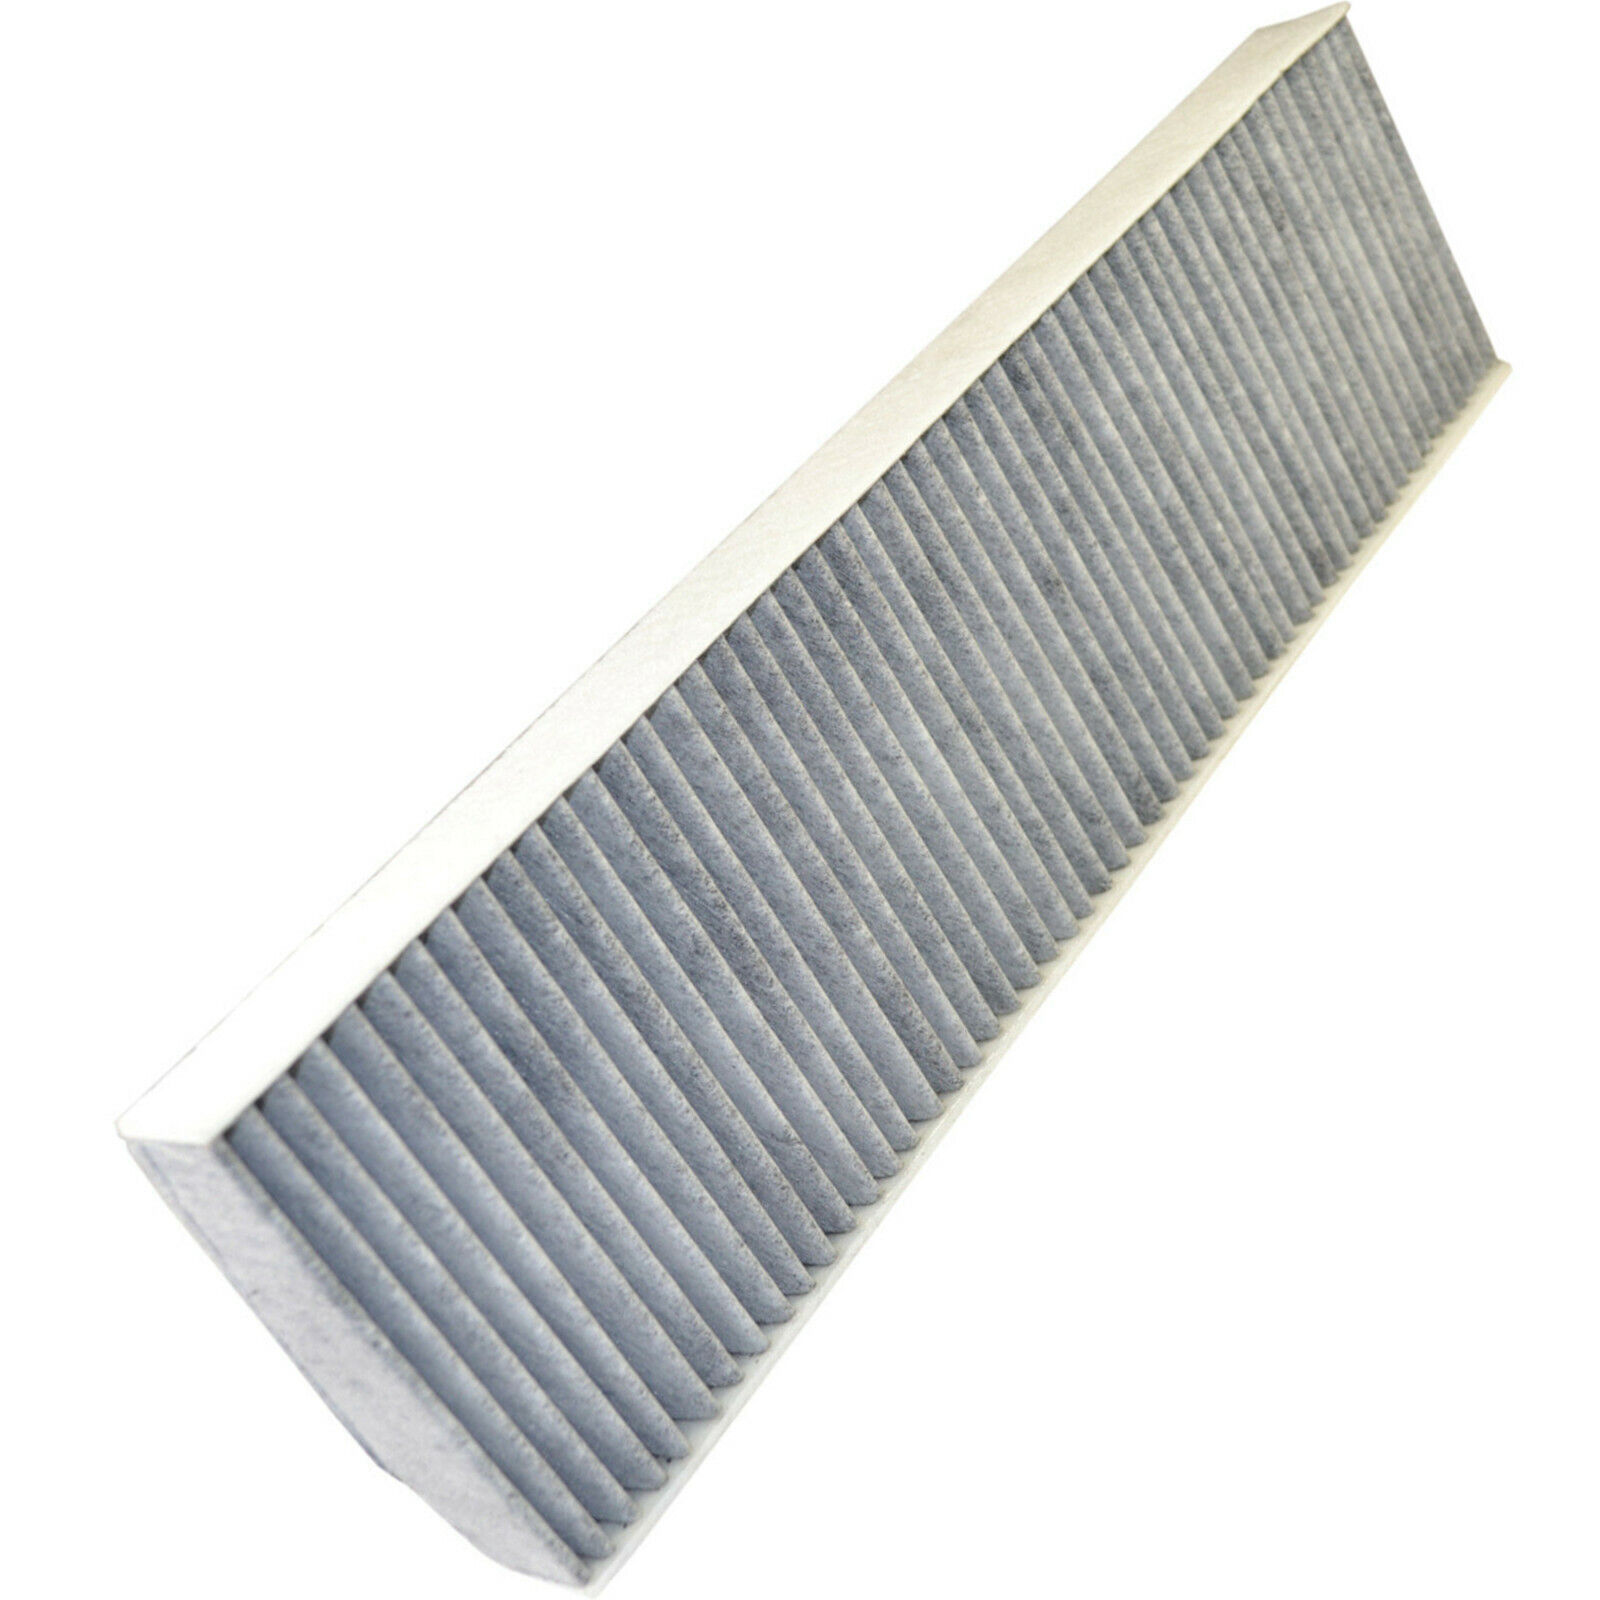 HQRP Activated Charcoal Cabin Air Filter for MINI Cooper 64319127516